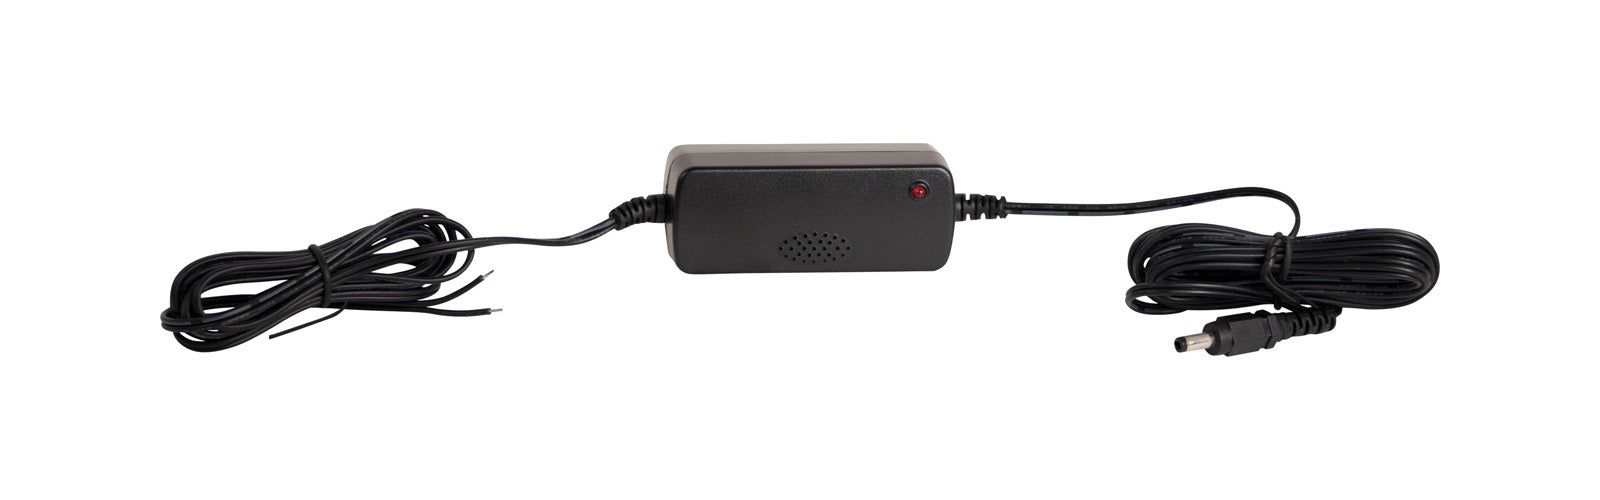 works with the original XM roady receiver